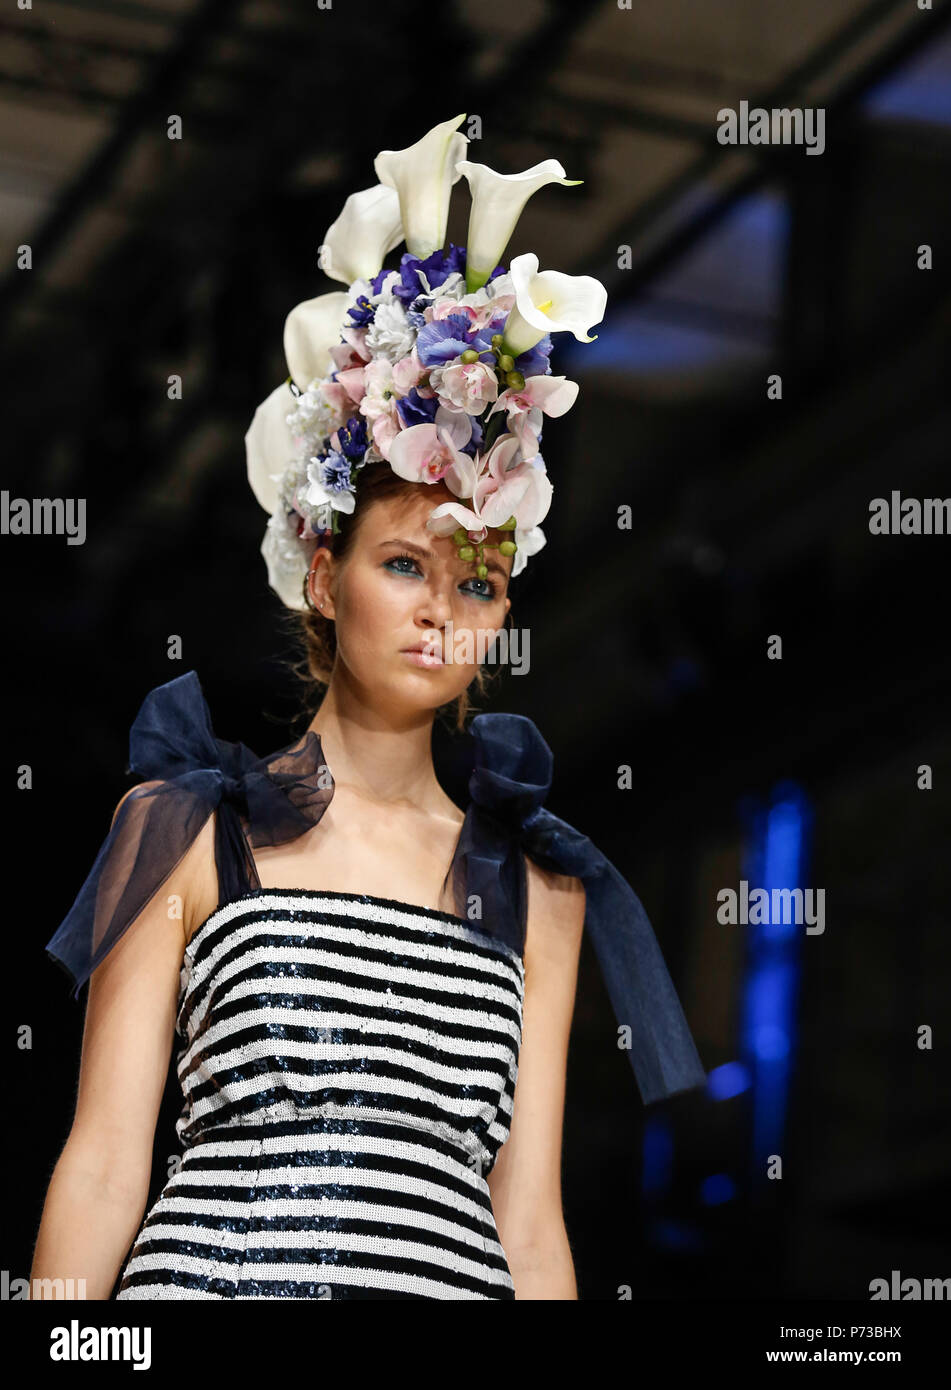 Berlin, Germany - July 4, 2018: A model presents a Spring/Summer 2019 Maison Common collection during the second day of MBFW Berlin Fashion Weak in the ewerk showspace in Berlin. Credit: Michal Busko/Alamy Live News Stock Photo